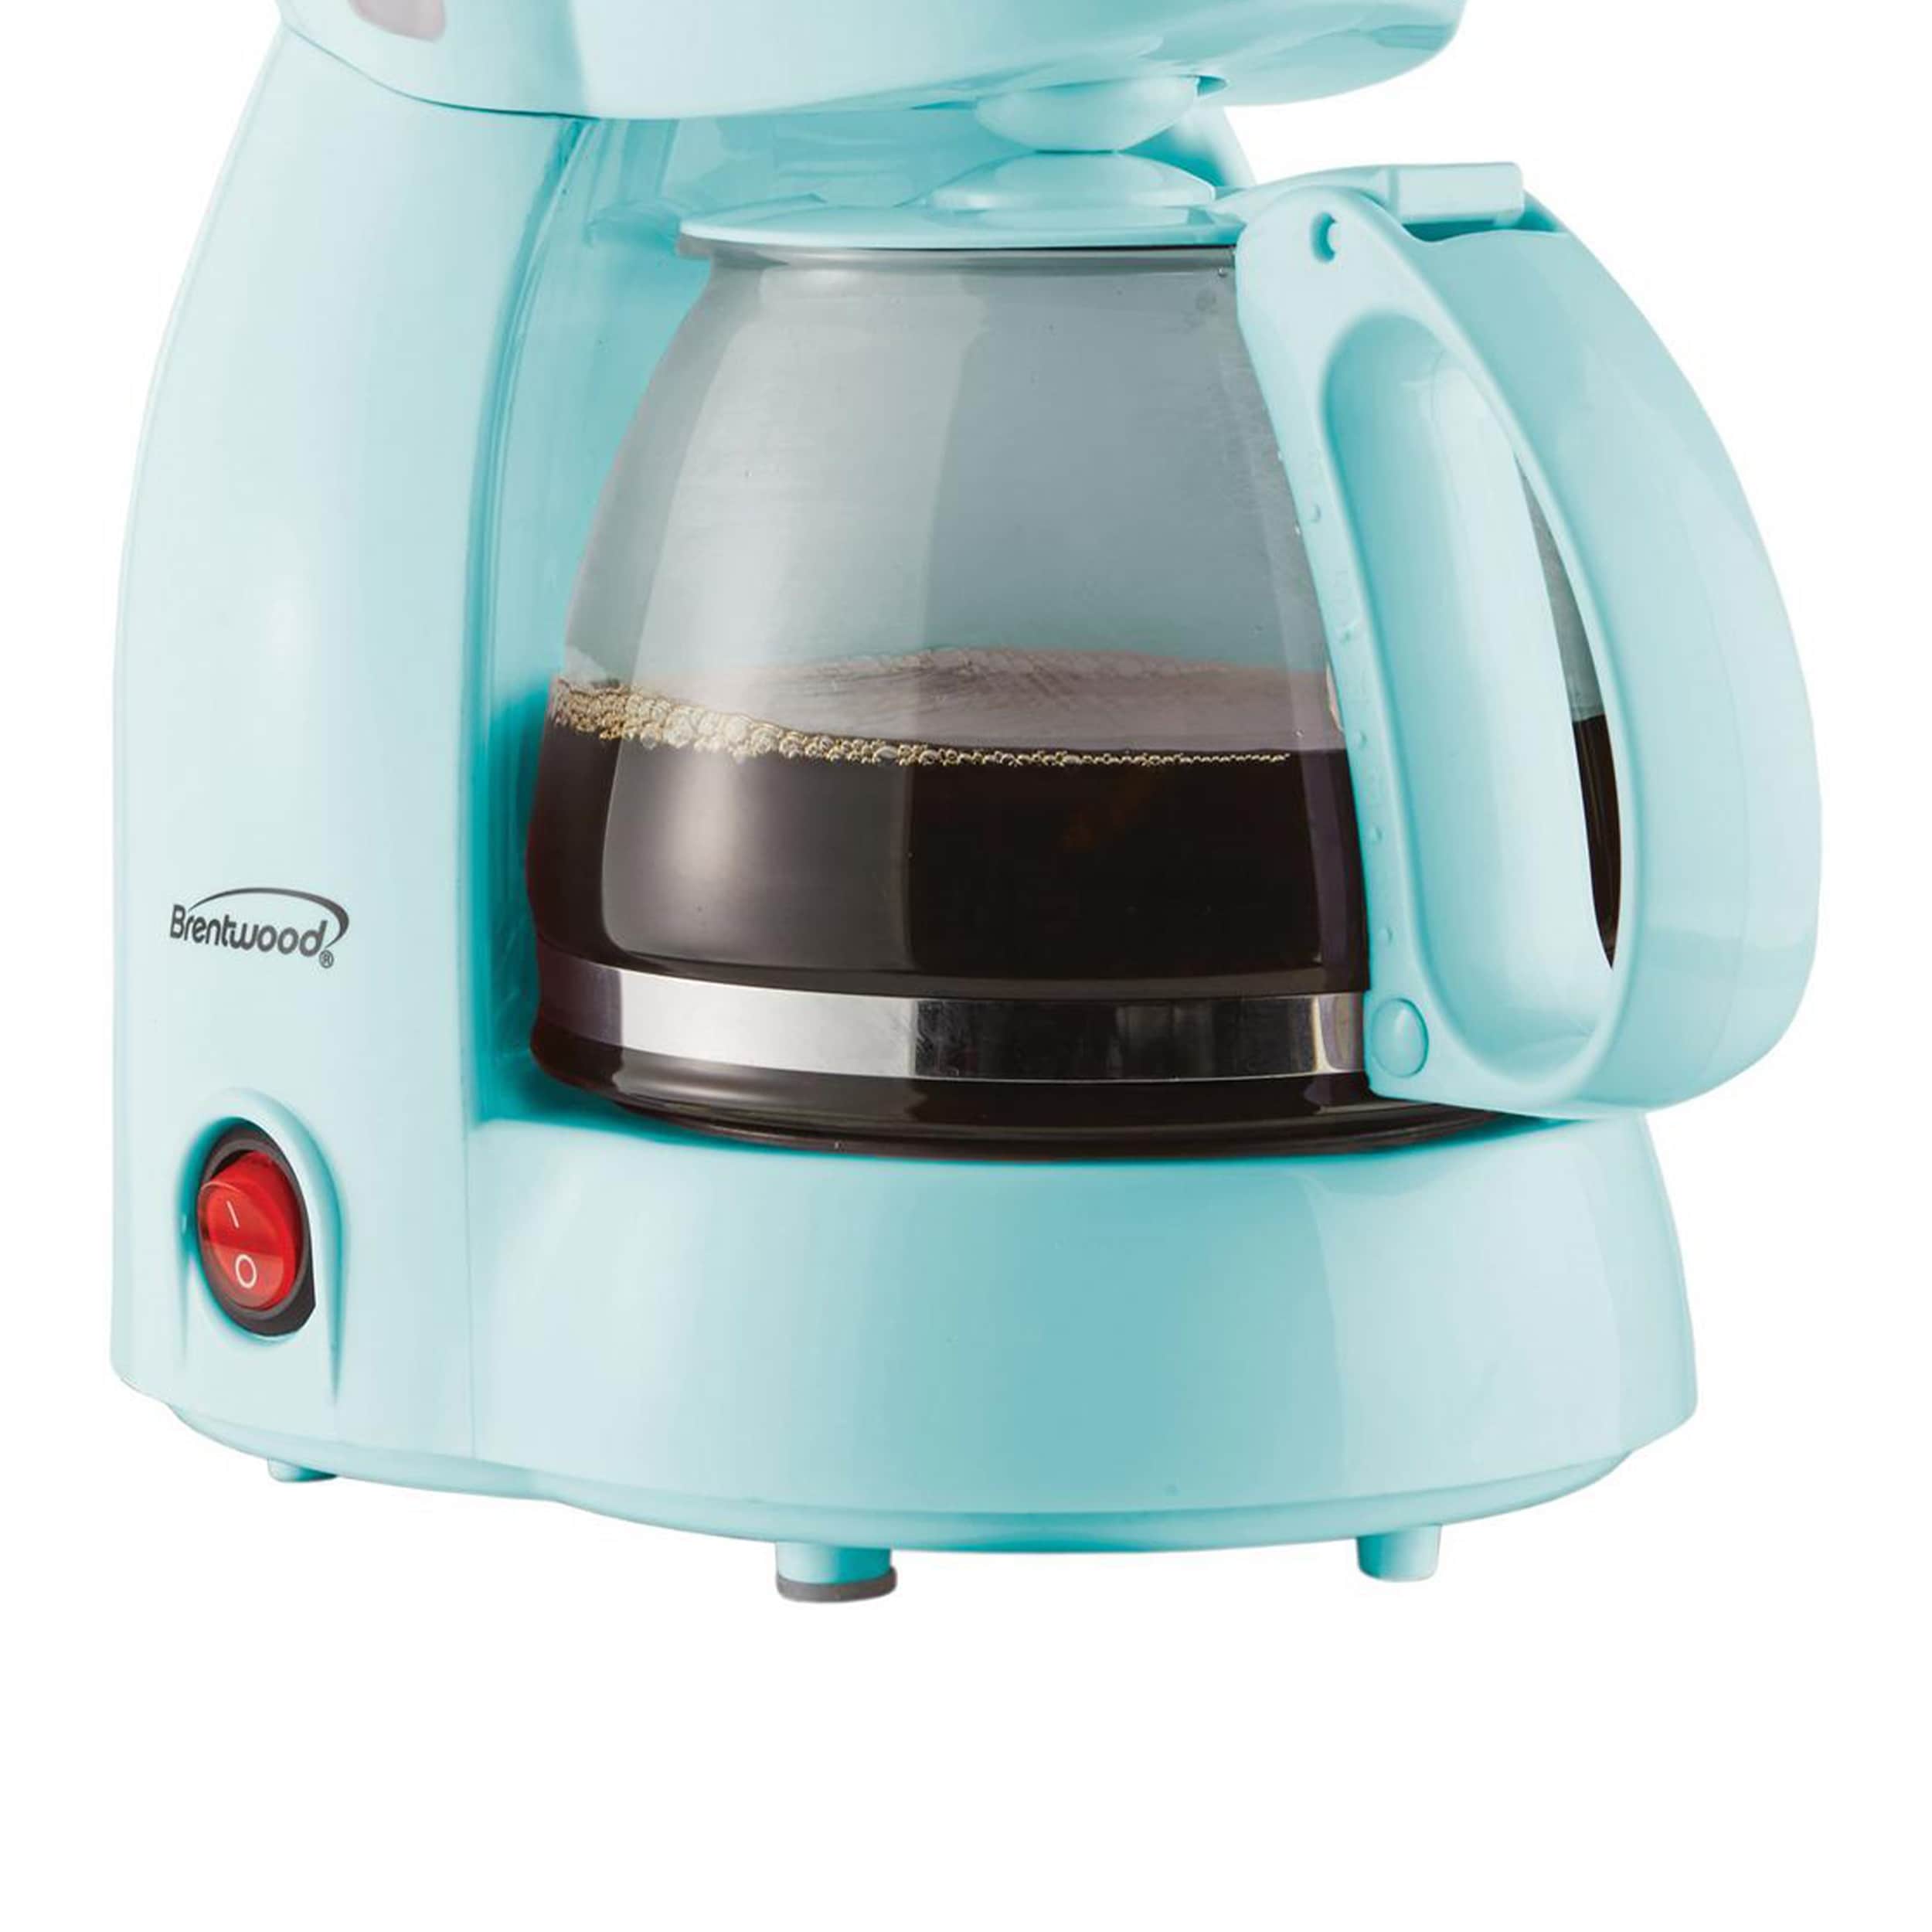 https://ak1.ostkcdn.com/images/products/is/images/direct/7e8b6a84379f03a2b8c8060b11c4973177fa7aa3/Brentwood-4-Cup-650-Watt-Coffee-Maker-in-Blue.jpg